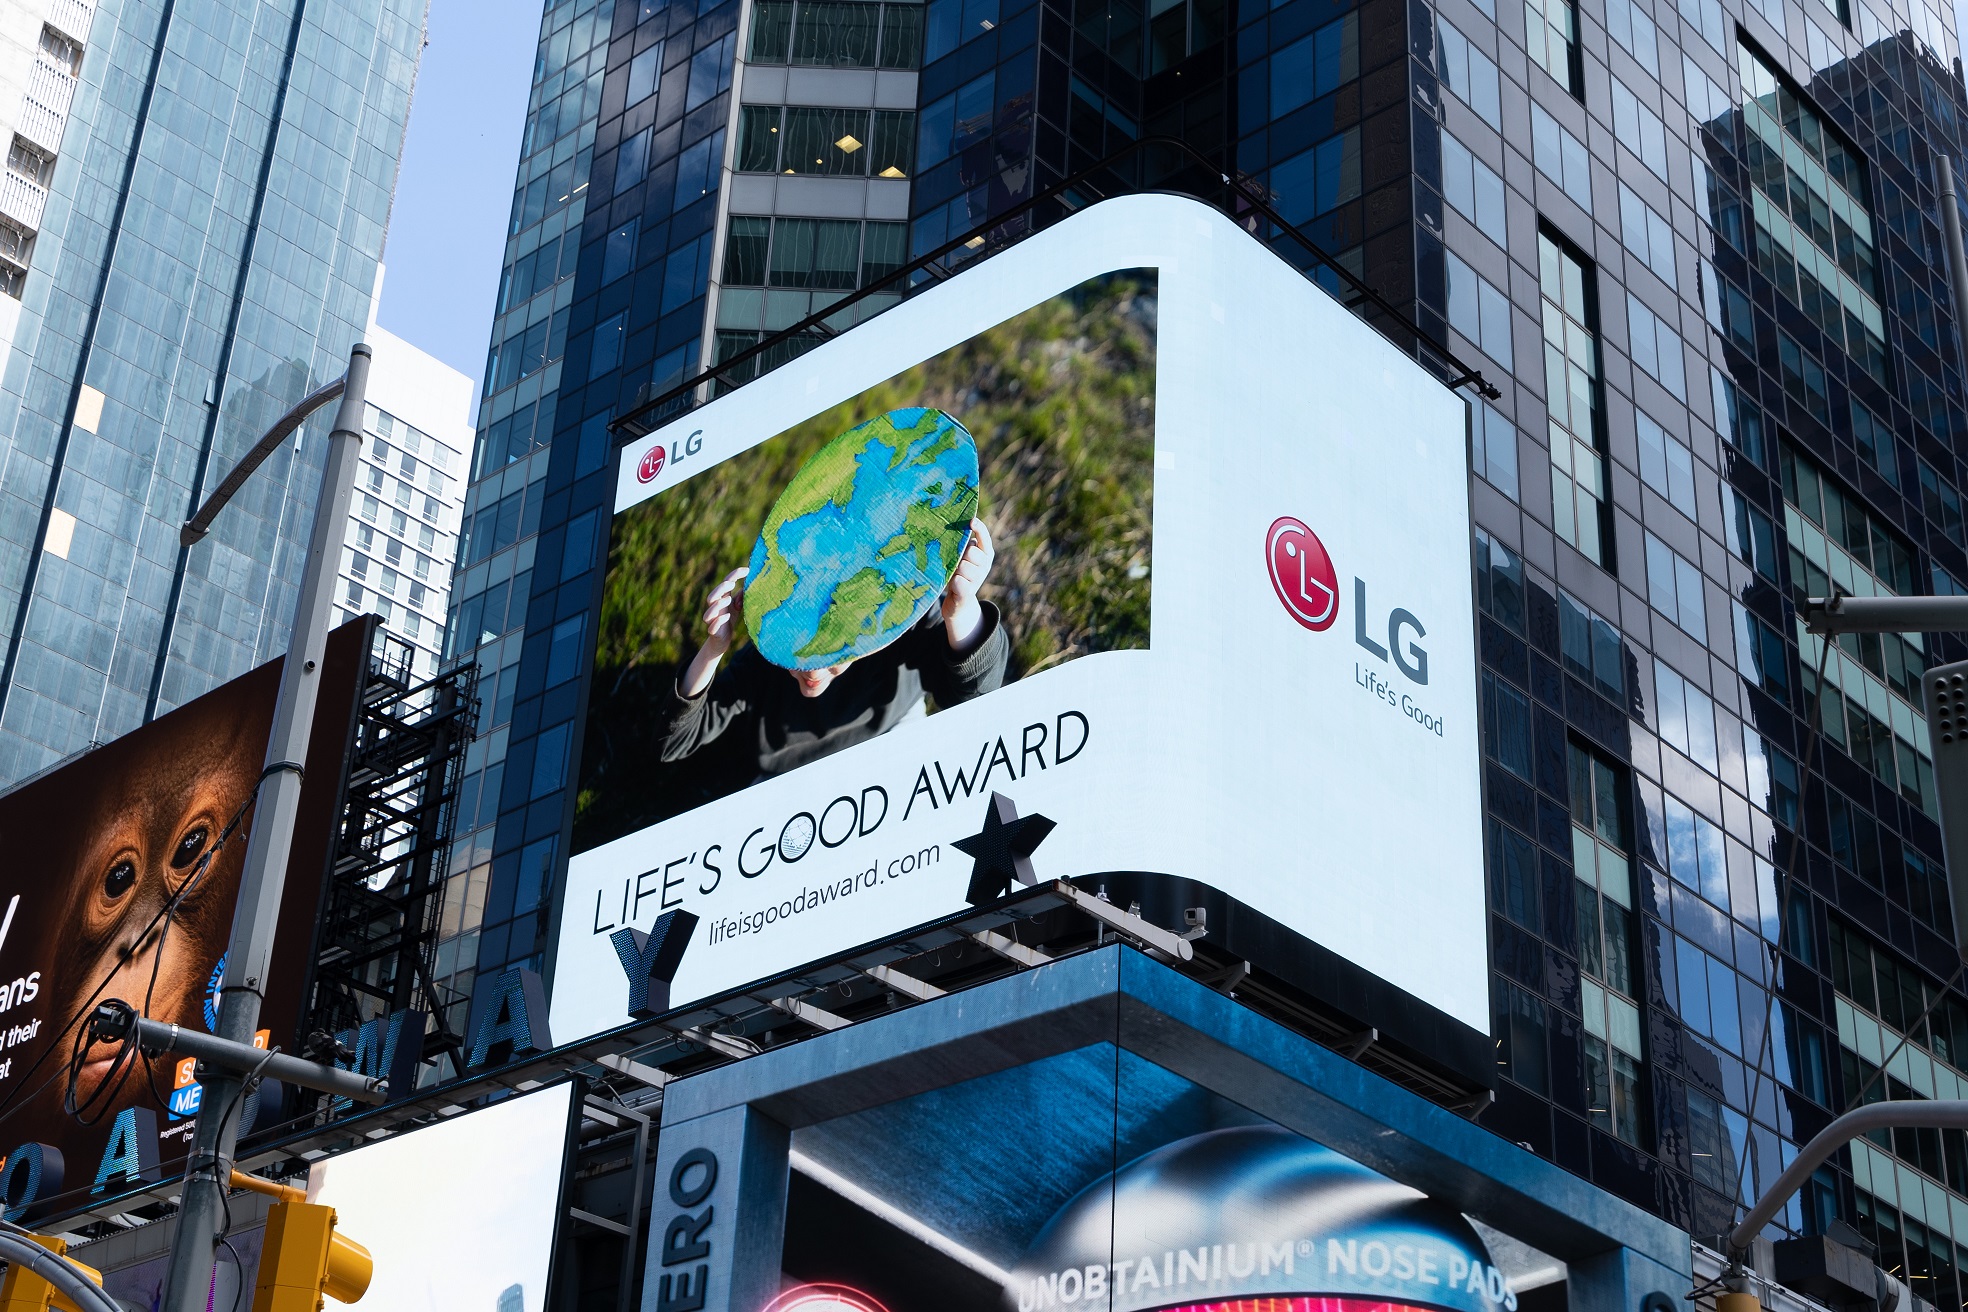 LG's digital billboard in Times Square, New York displaying a promotional video of its Life's Good Award